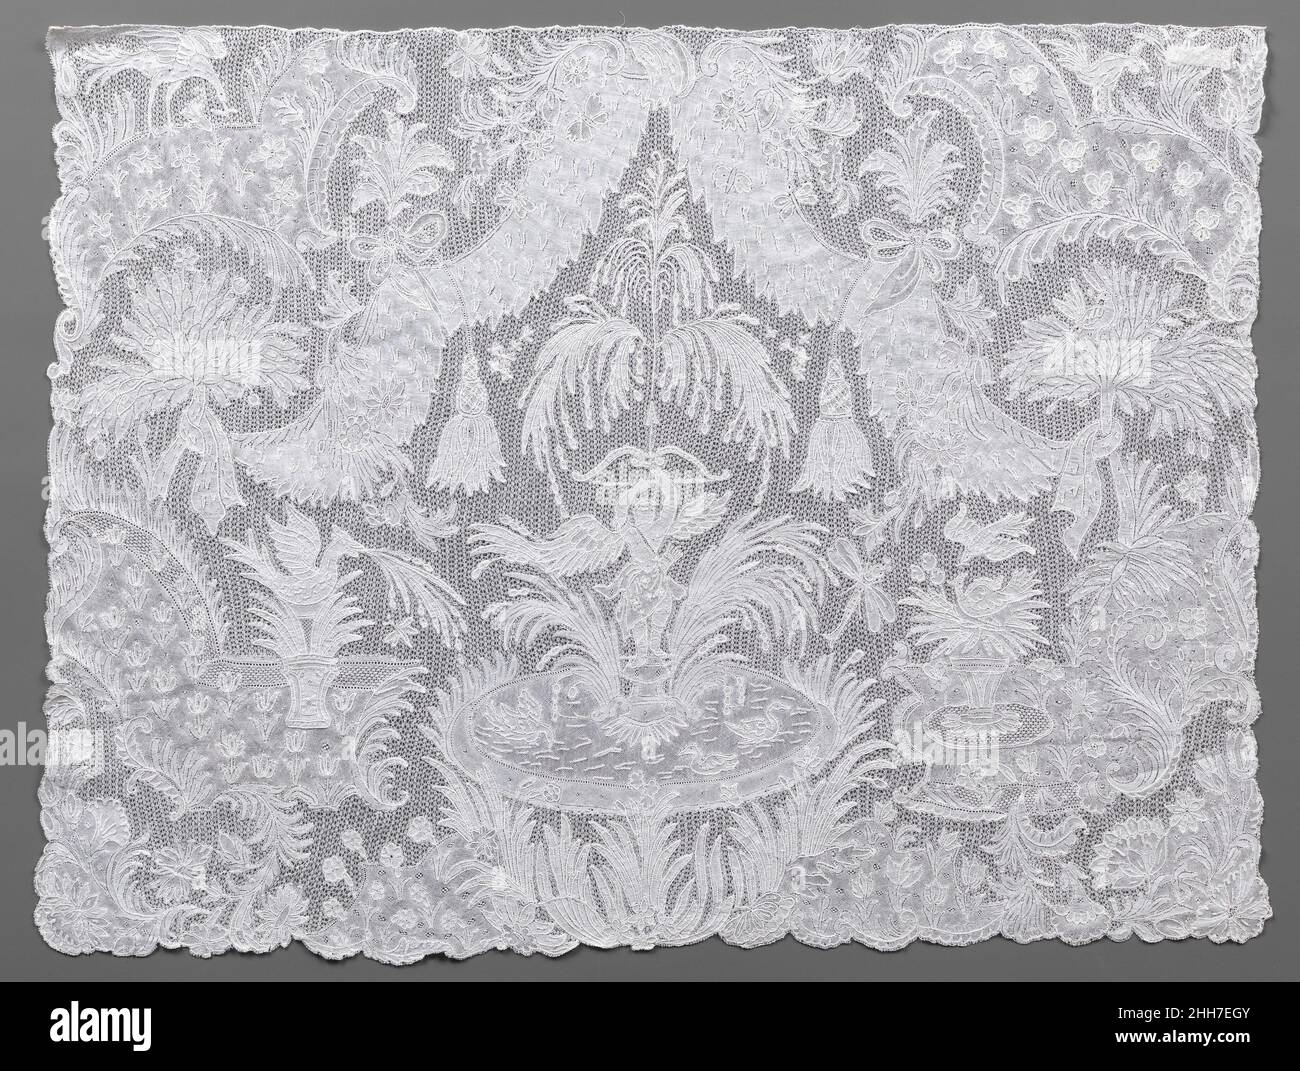 Cravat end mid-18th century Flemish, Brussels Figural lace panels such as this one were items of gentlemen's high-fashion neckwear, meant to be attached to the end of a long, fine fabric cravat. The elaborate imagery, time-consuming to achieve, made the panels extremely expensive accessories. Drawing inspiration from contemporary formal gardens, the design of this example centers on a fountain with water jets that issue from the tip of Amor's raised arrow and fall to fill a basin for swimming birds. Set among the parterres planted with tulips and other flowers is a fountain in the form of the Stock Photo